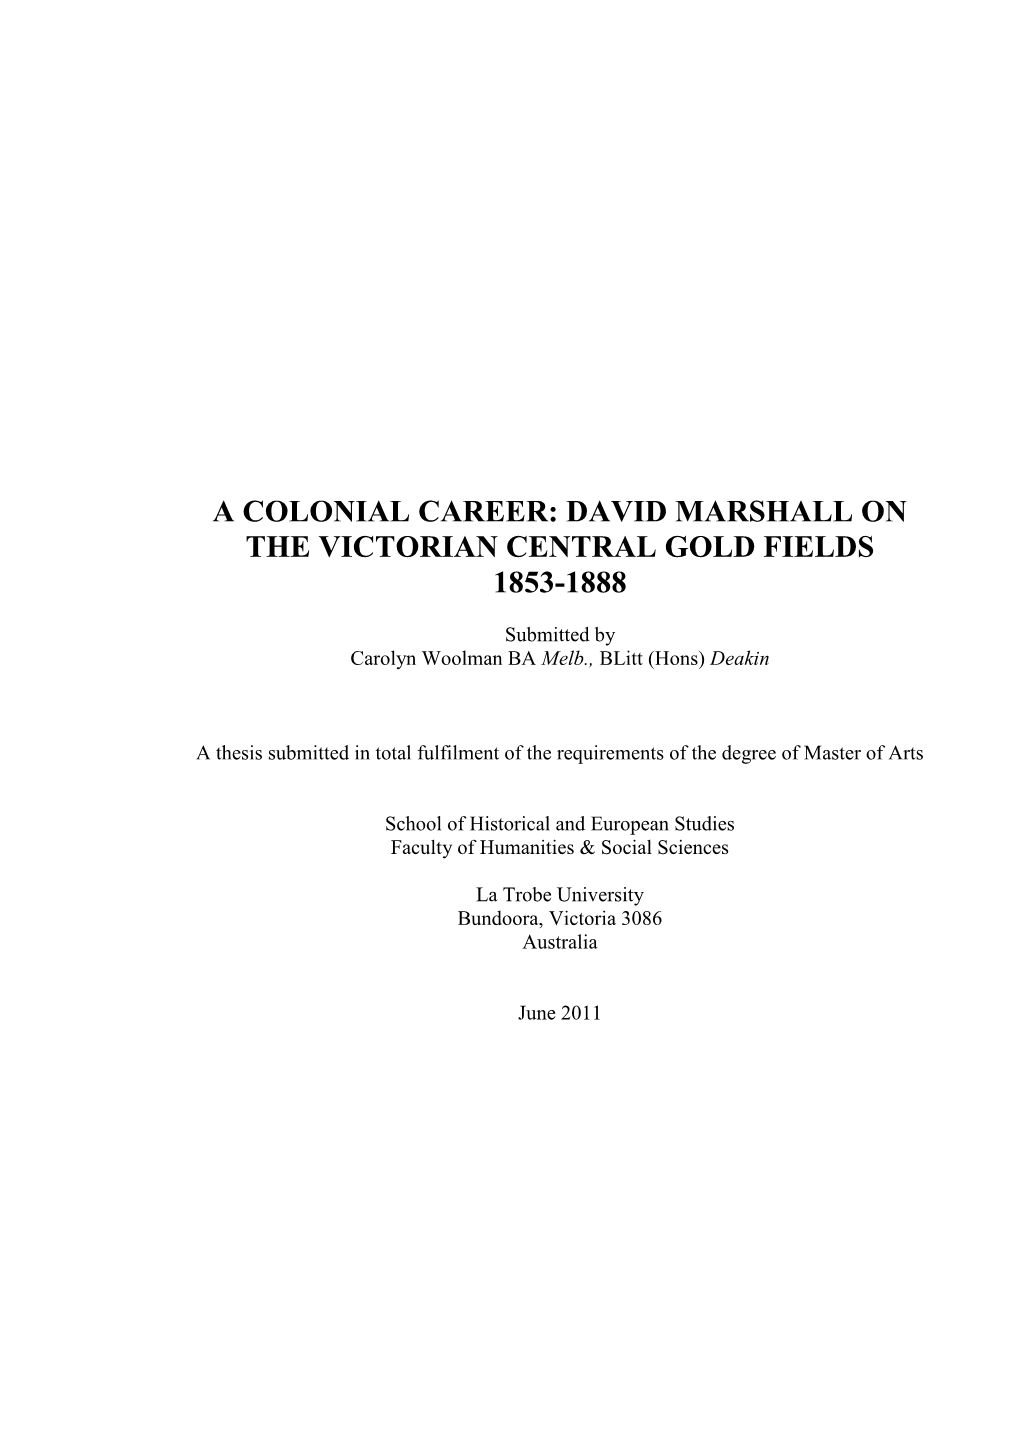 David Marshall on the Victorian Central Gold Fields 1853-1888